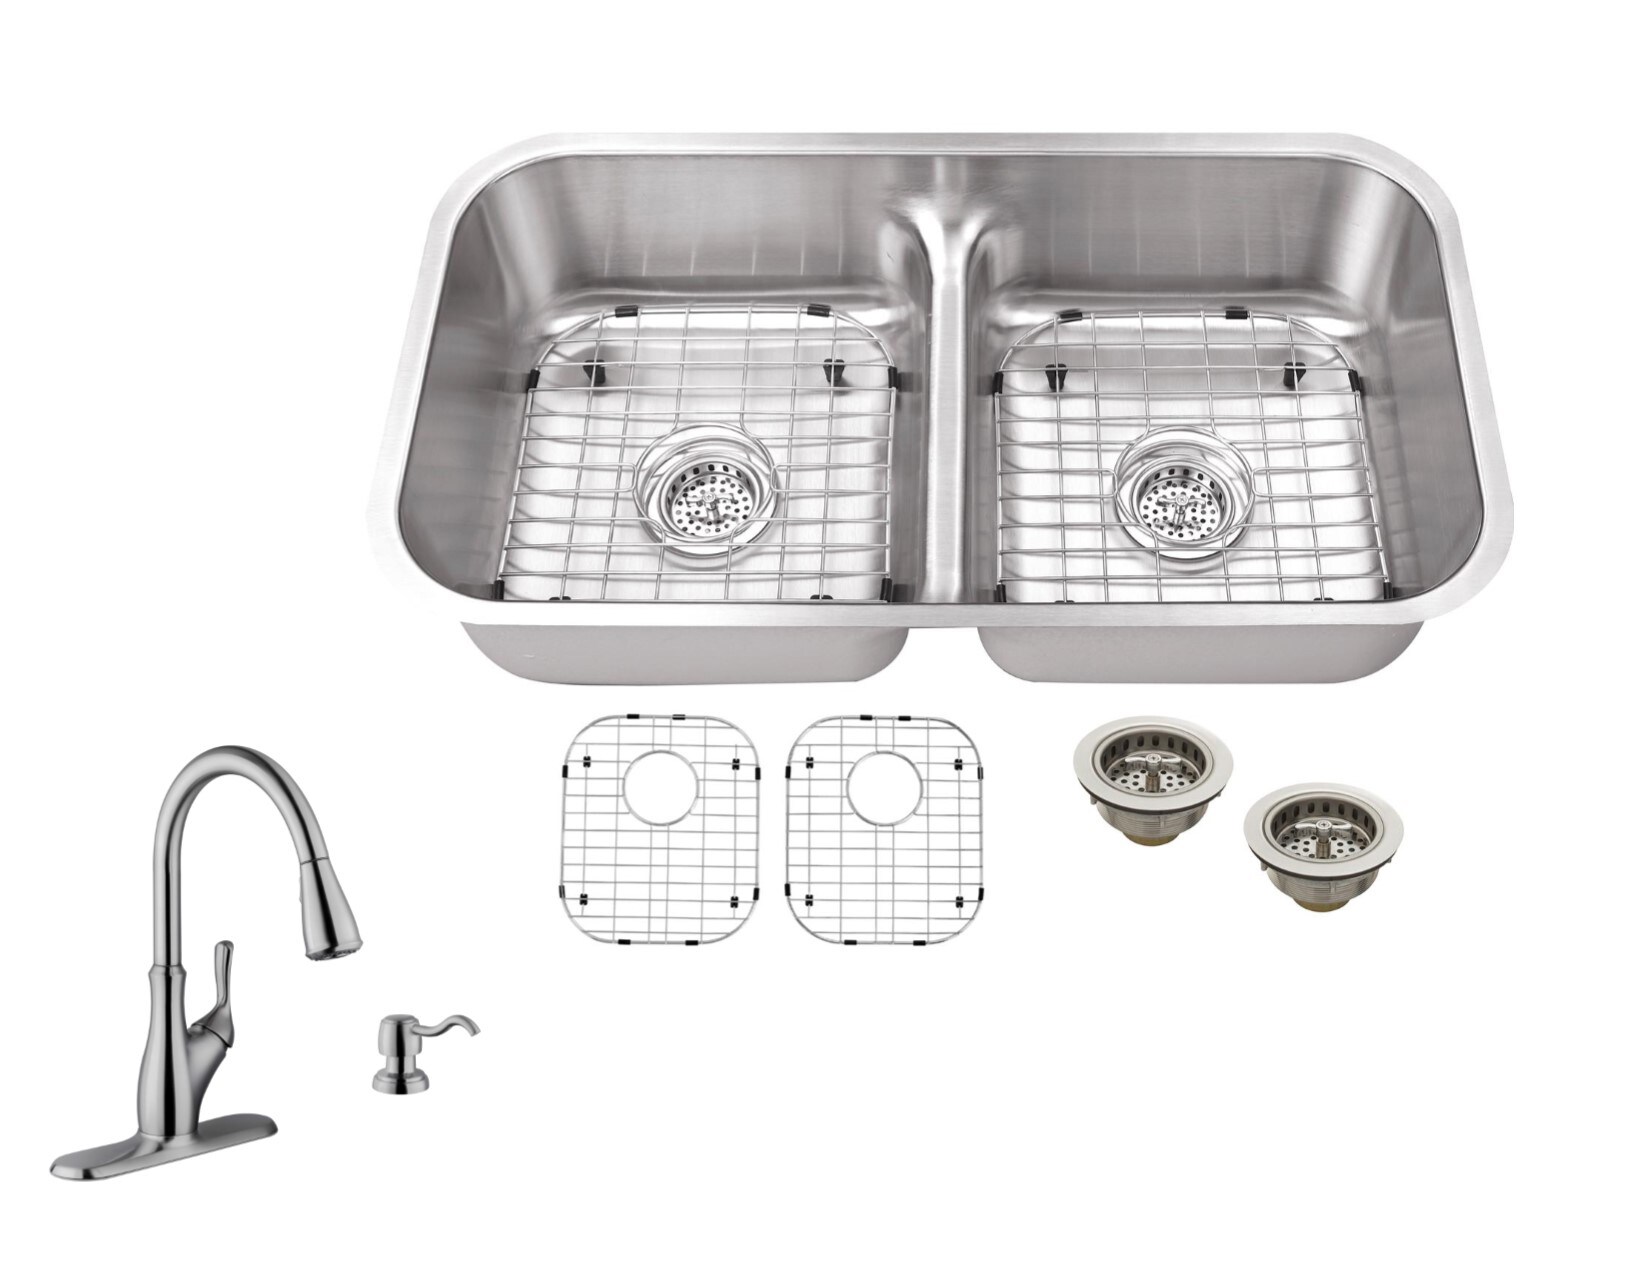 Ruvati Parmi Undermount 32.25-in x 18.875-in Brushed Stainless Steel Double  Offset Bowl Kitchen Sink in the Kitchen Sinks department at